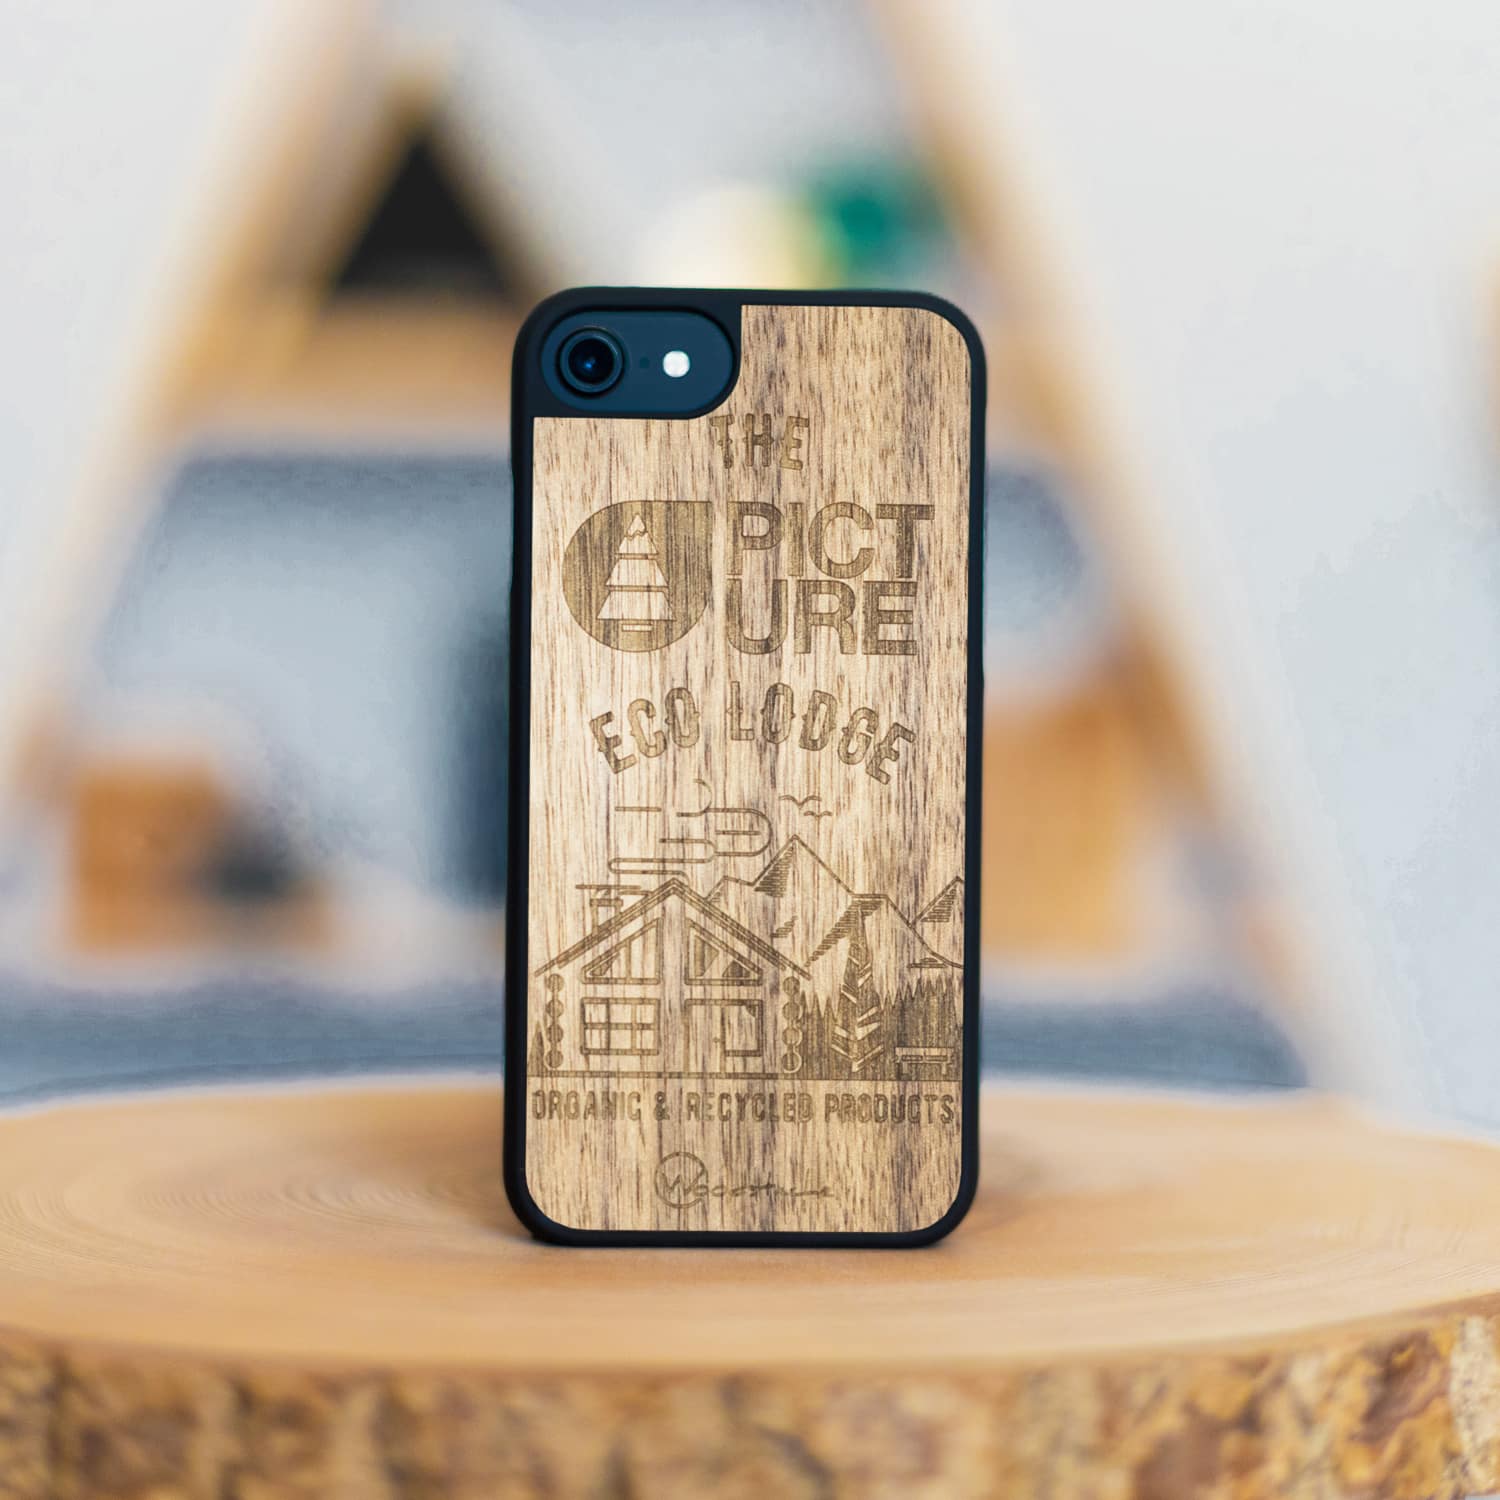 Coque iPhone Picture Staywild - Woodstache x Picture